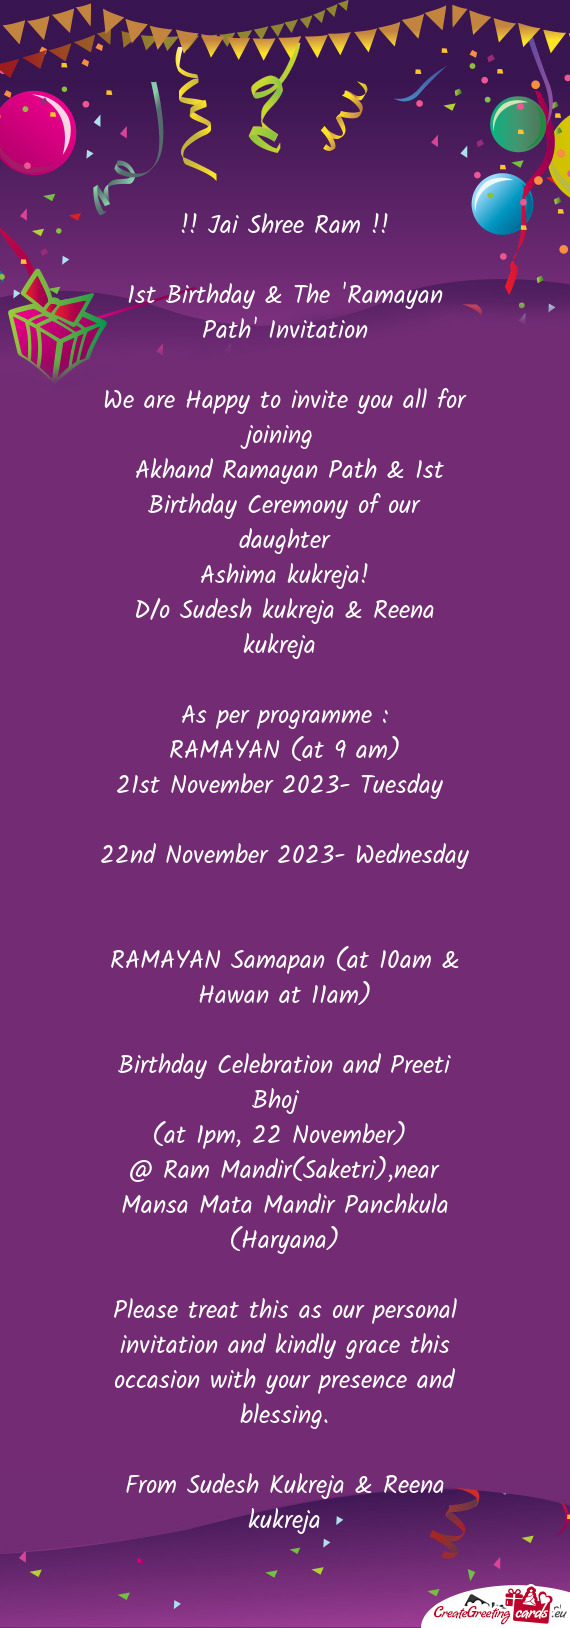 Akhand Ramayan Path & 1st Birthday Ceremony of our daughter